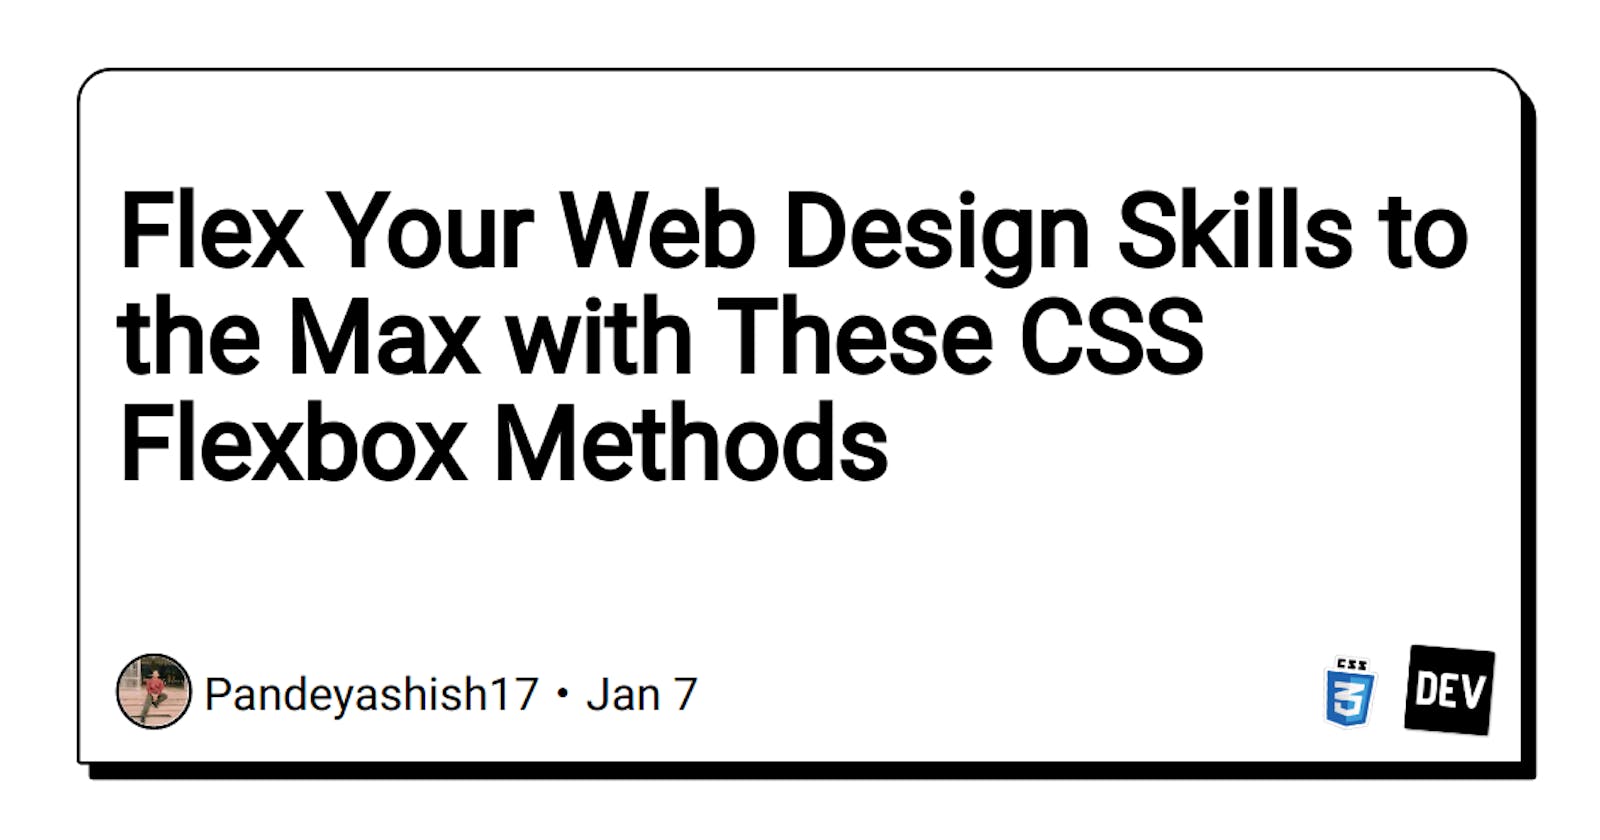 Flex Your Web Design Skills to the Max with These CSS Flexbox Methods